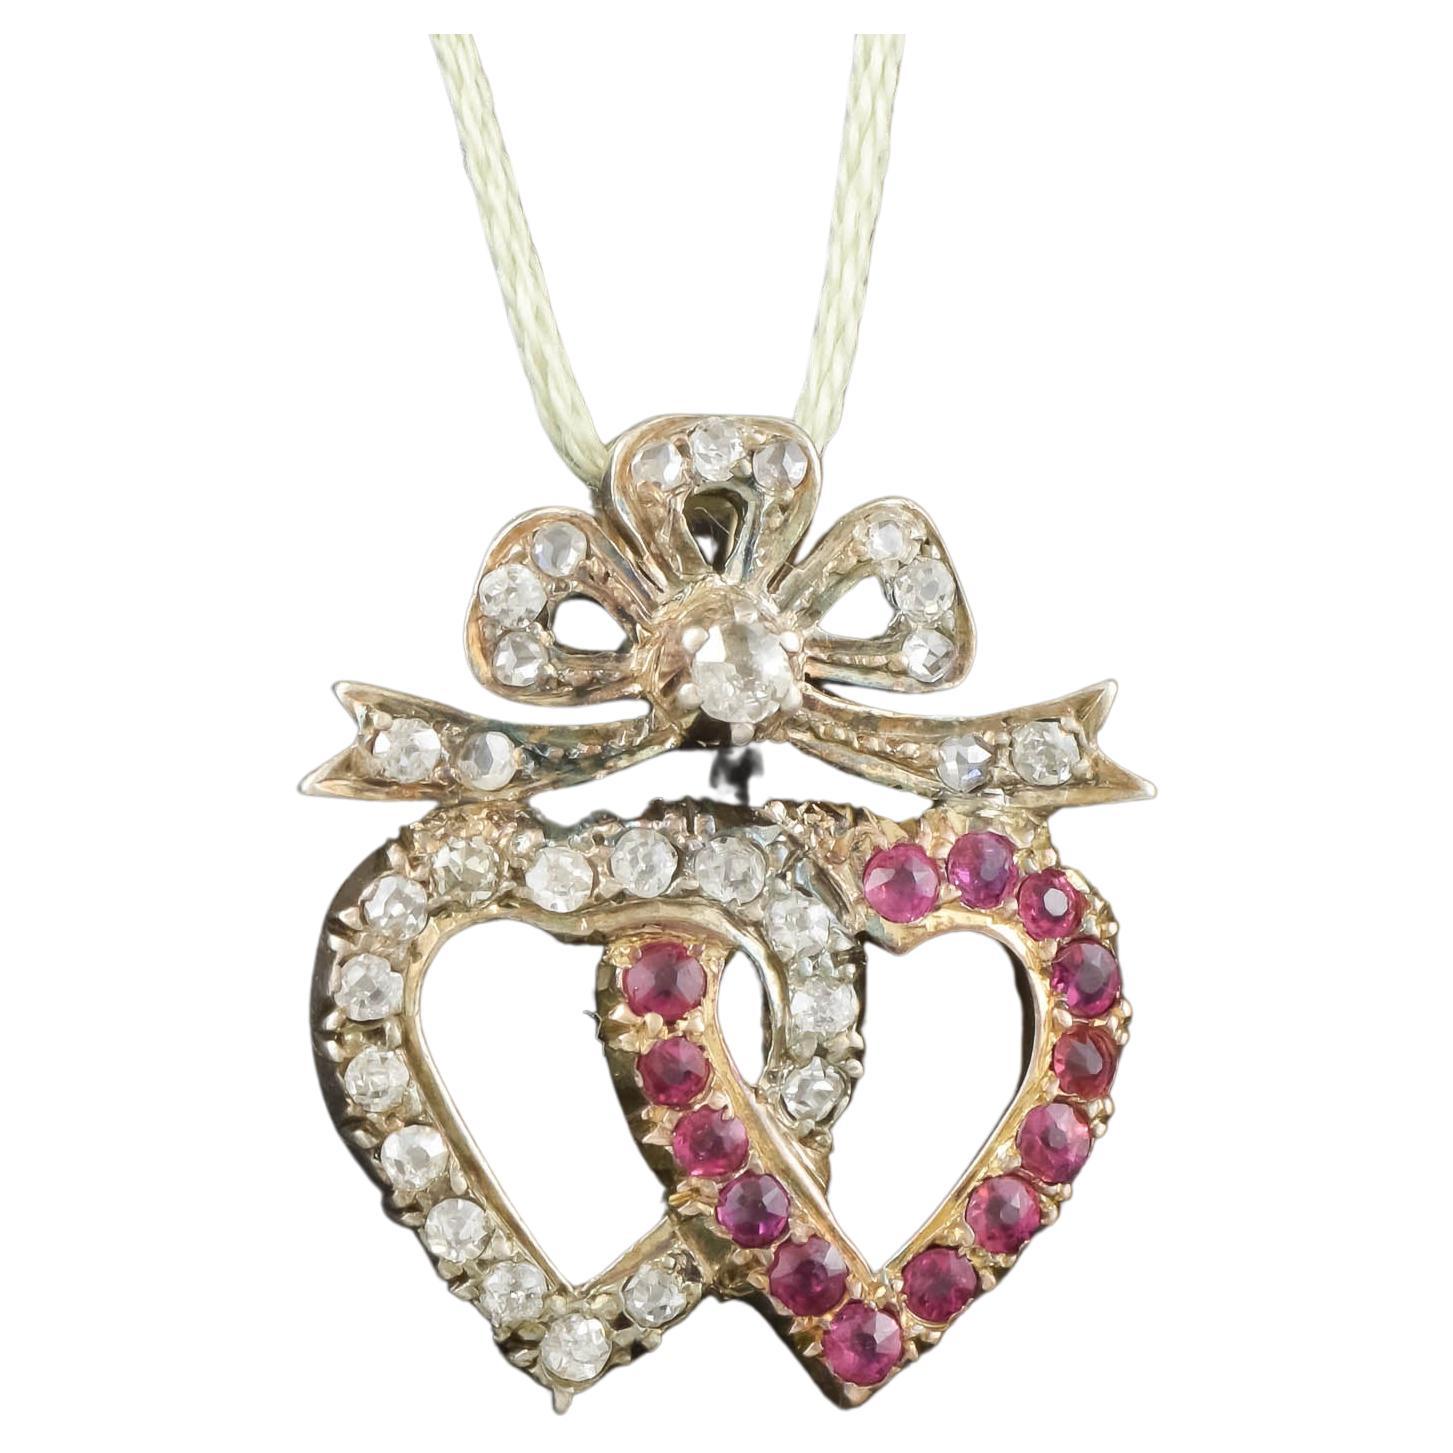 Antique Double Heart Pendant with Diamond & Rubies - approx 1.04 tcw